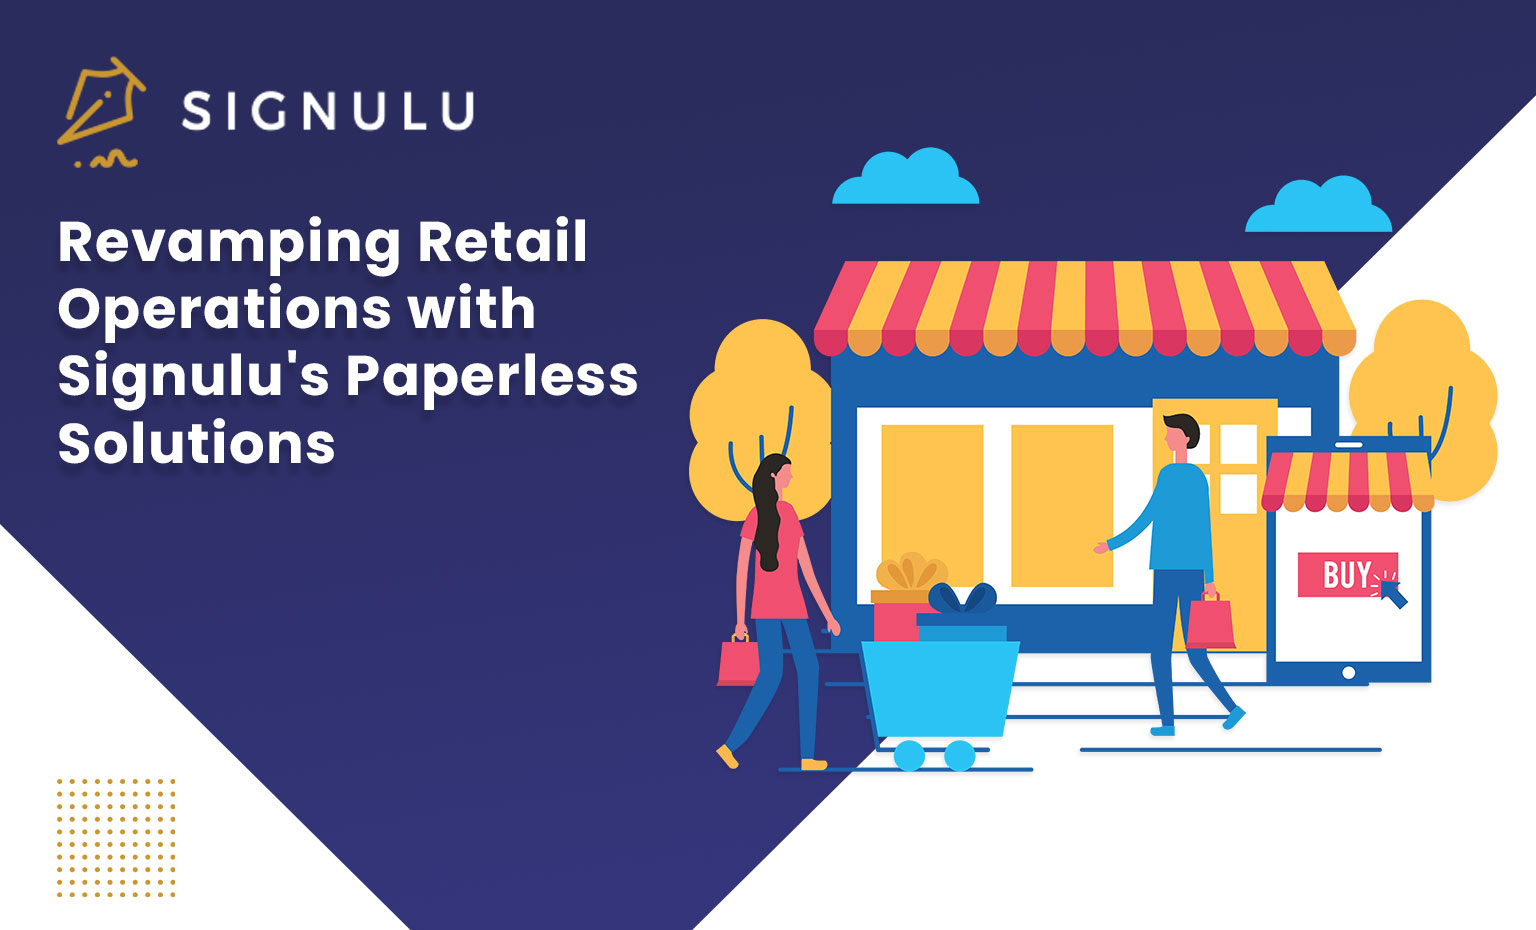 Revamping Retail Operations with Signulu’s Paperless Solutions